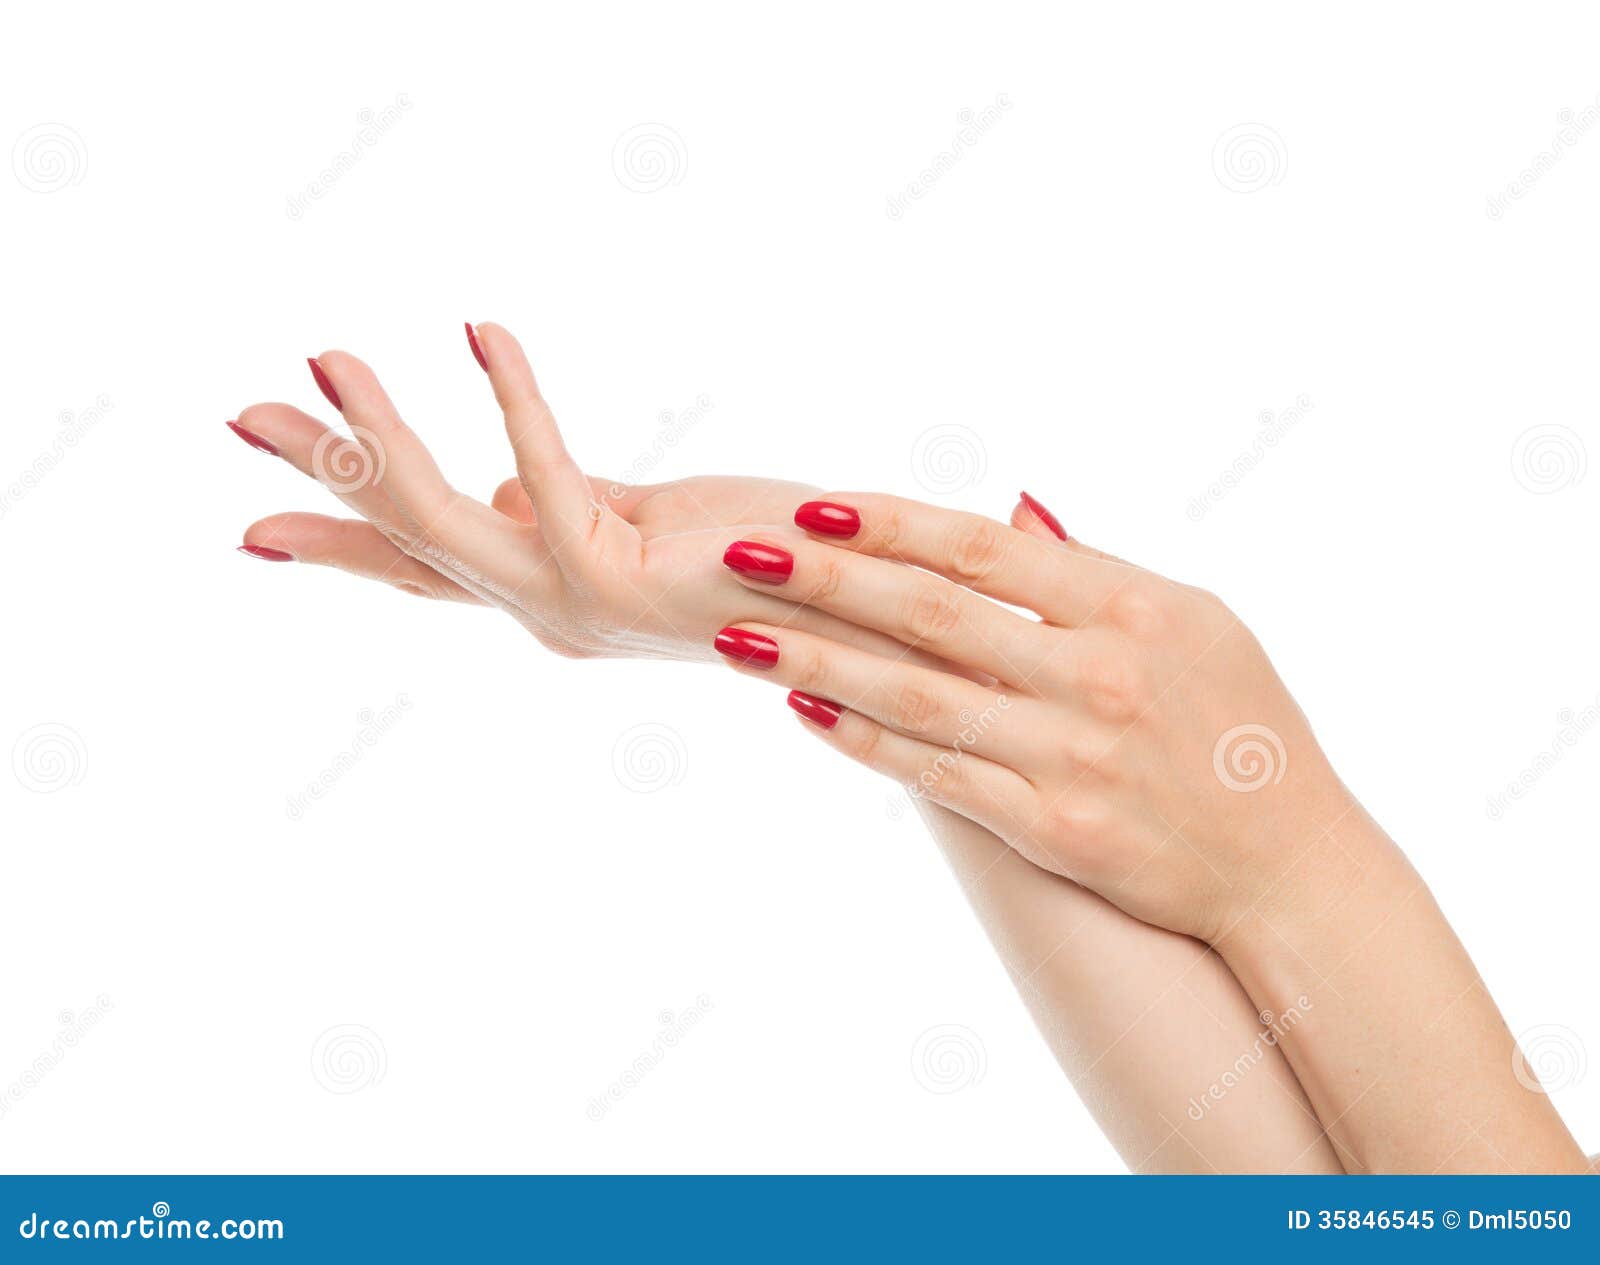 woman hands with manicured red nails